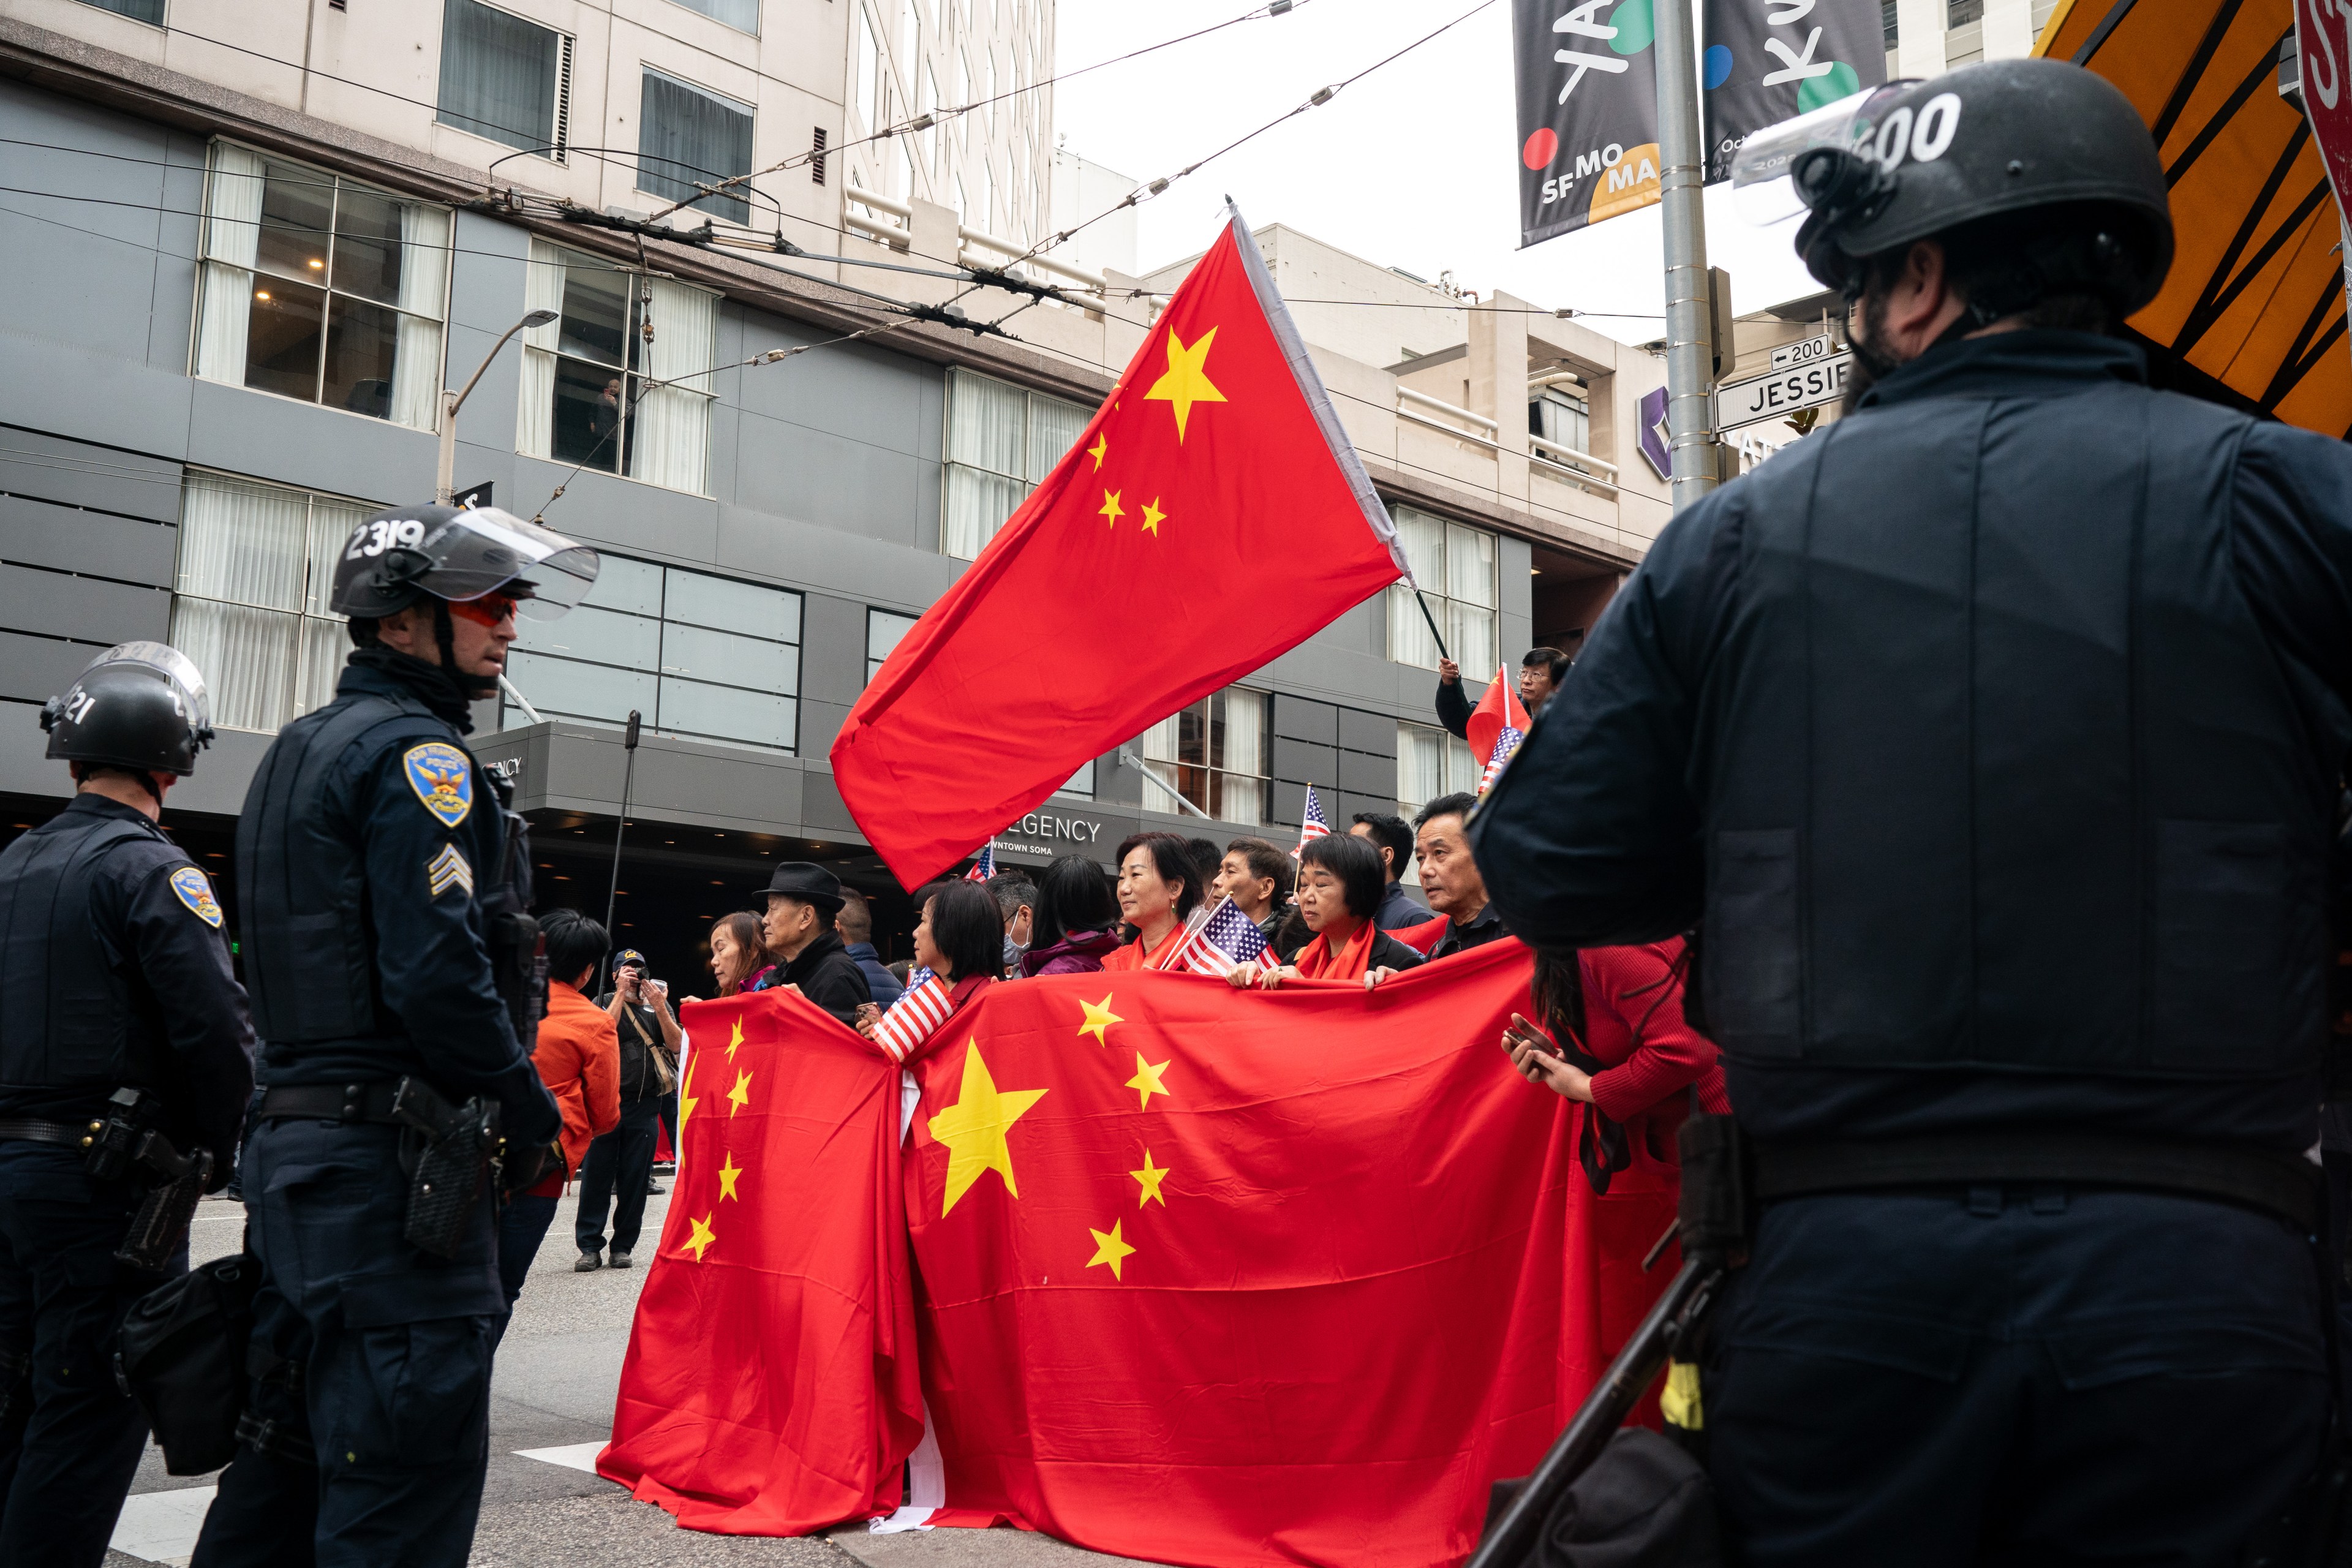 Chinese supporters stand on the side of the street with police on either side during a demonstration.